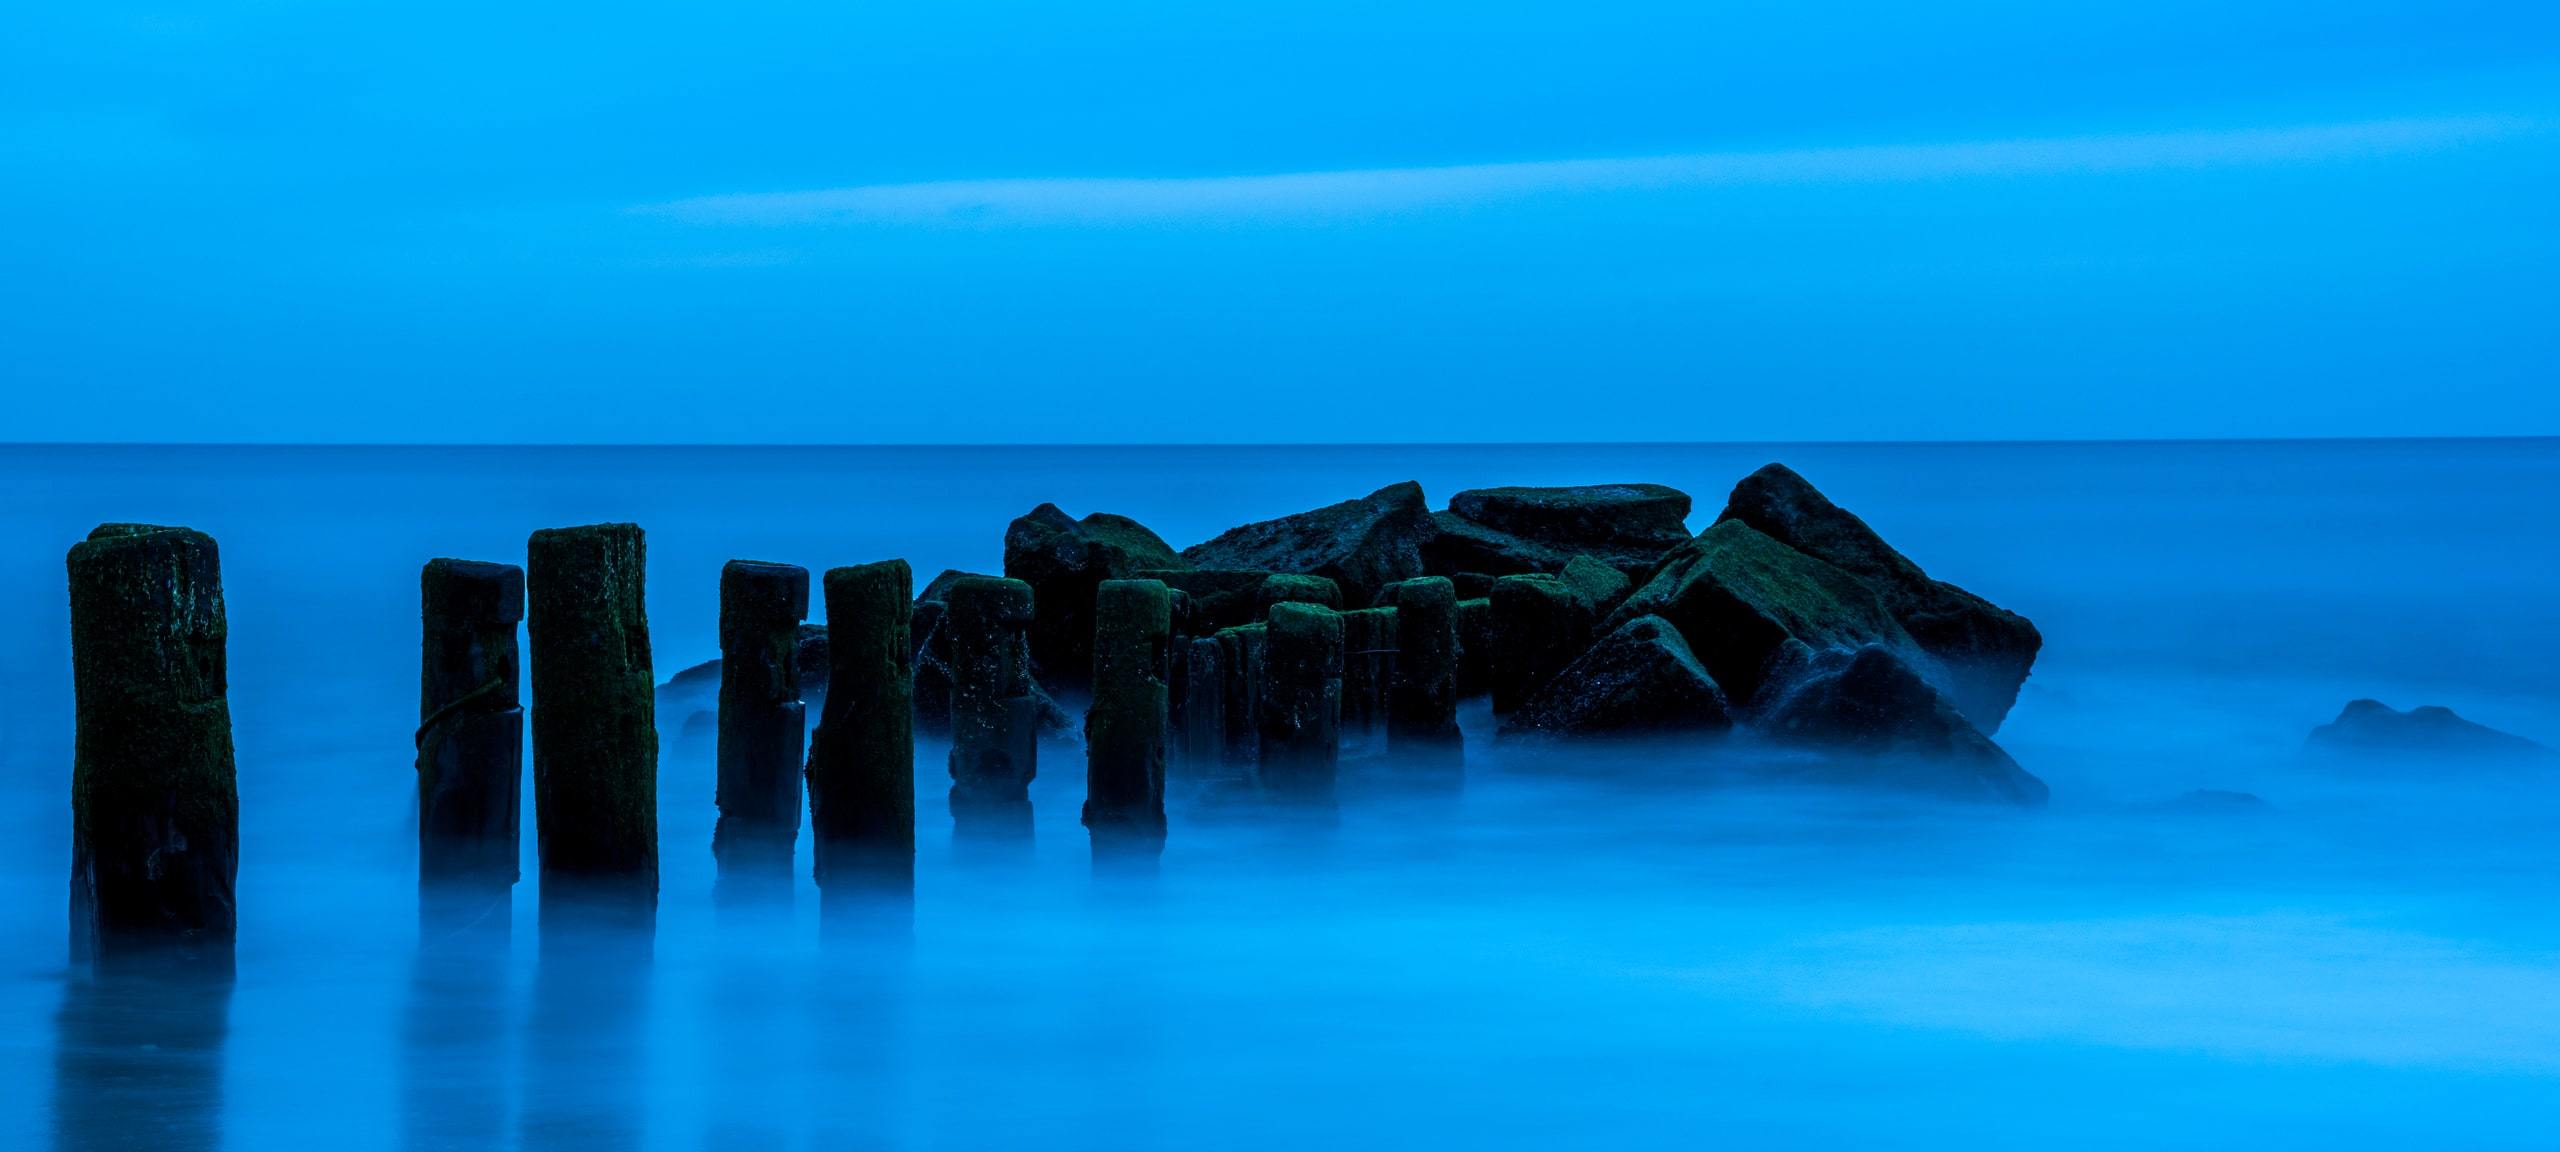 Blue hour over the old pier and shore in Bay Head, NJ